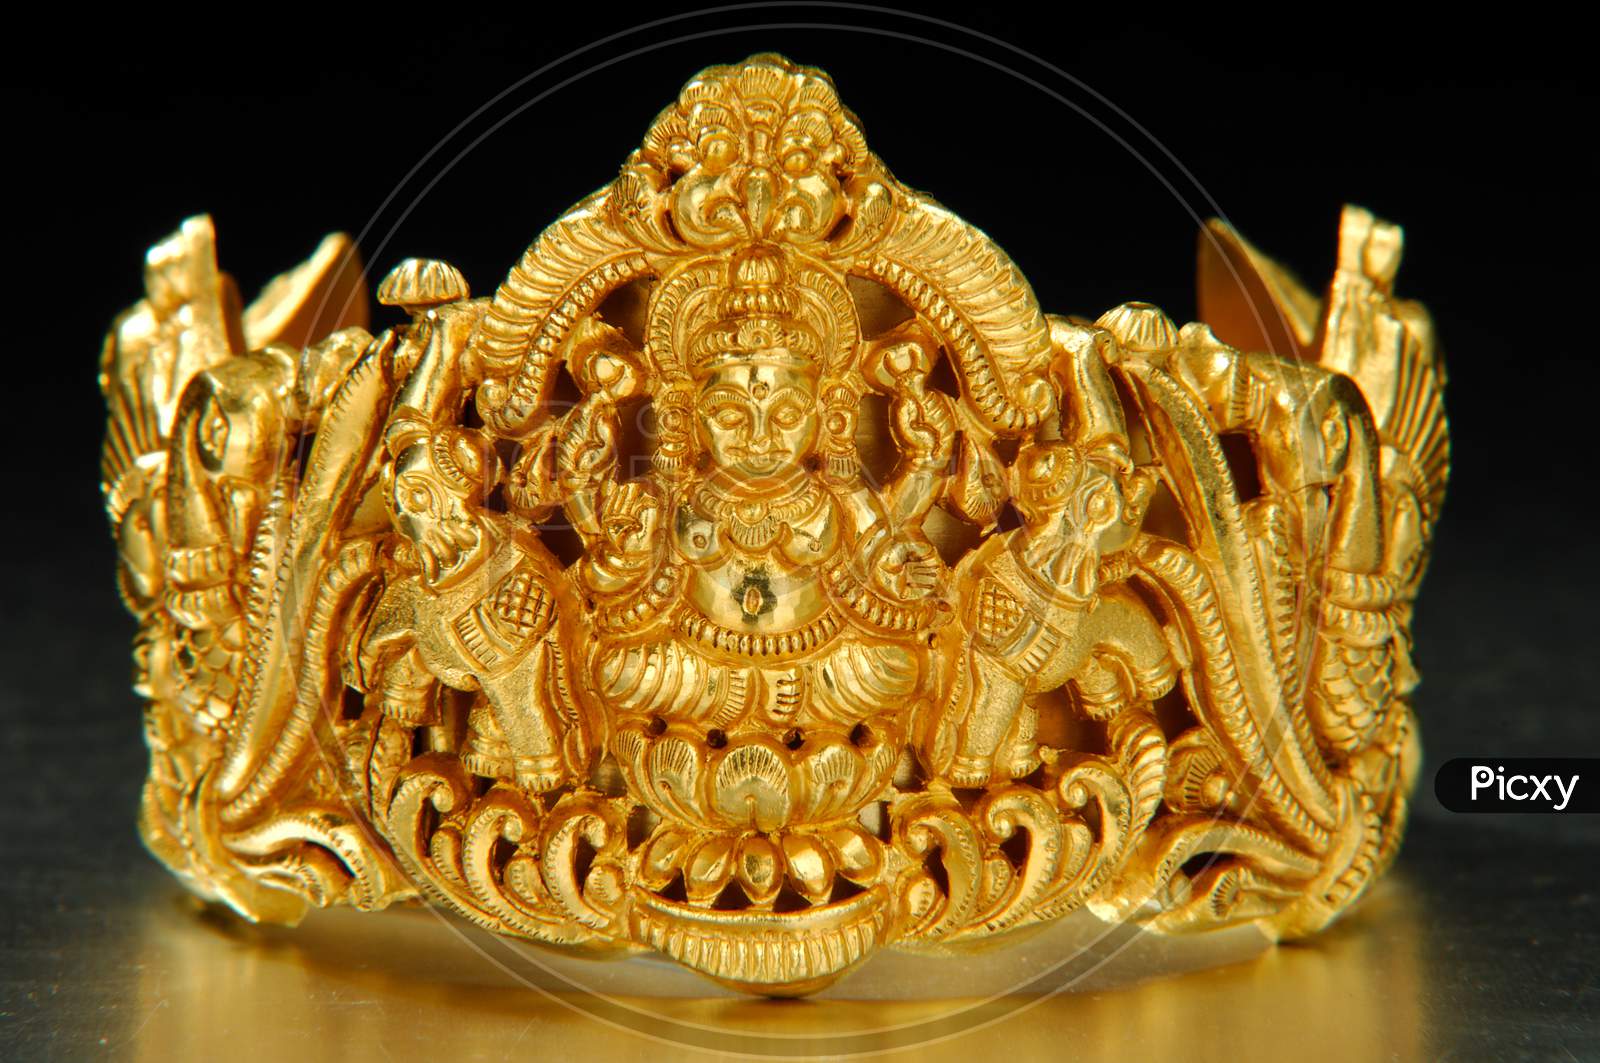 Gold coated crown